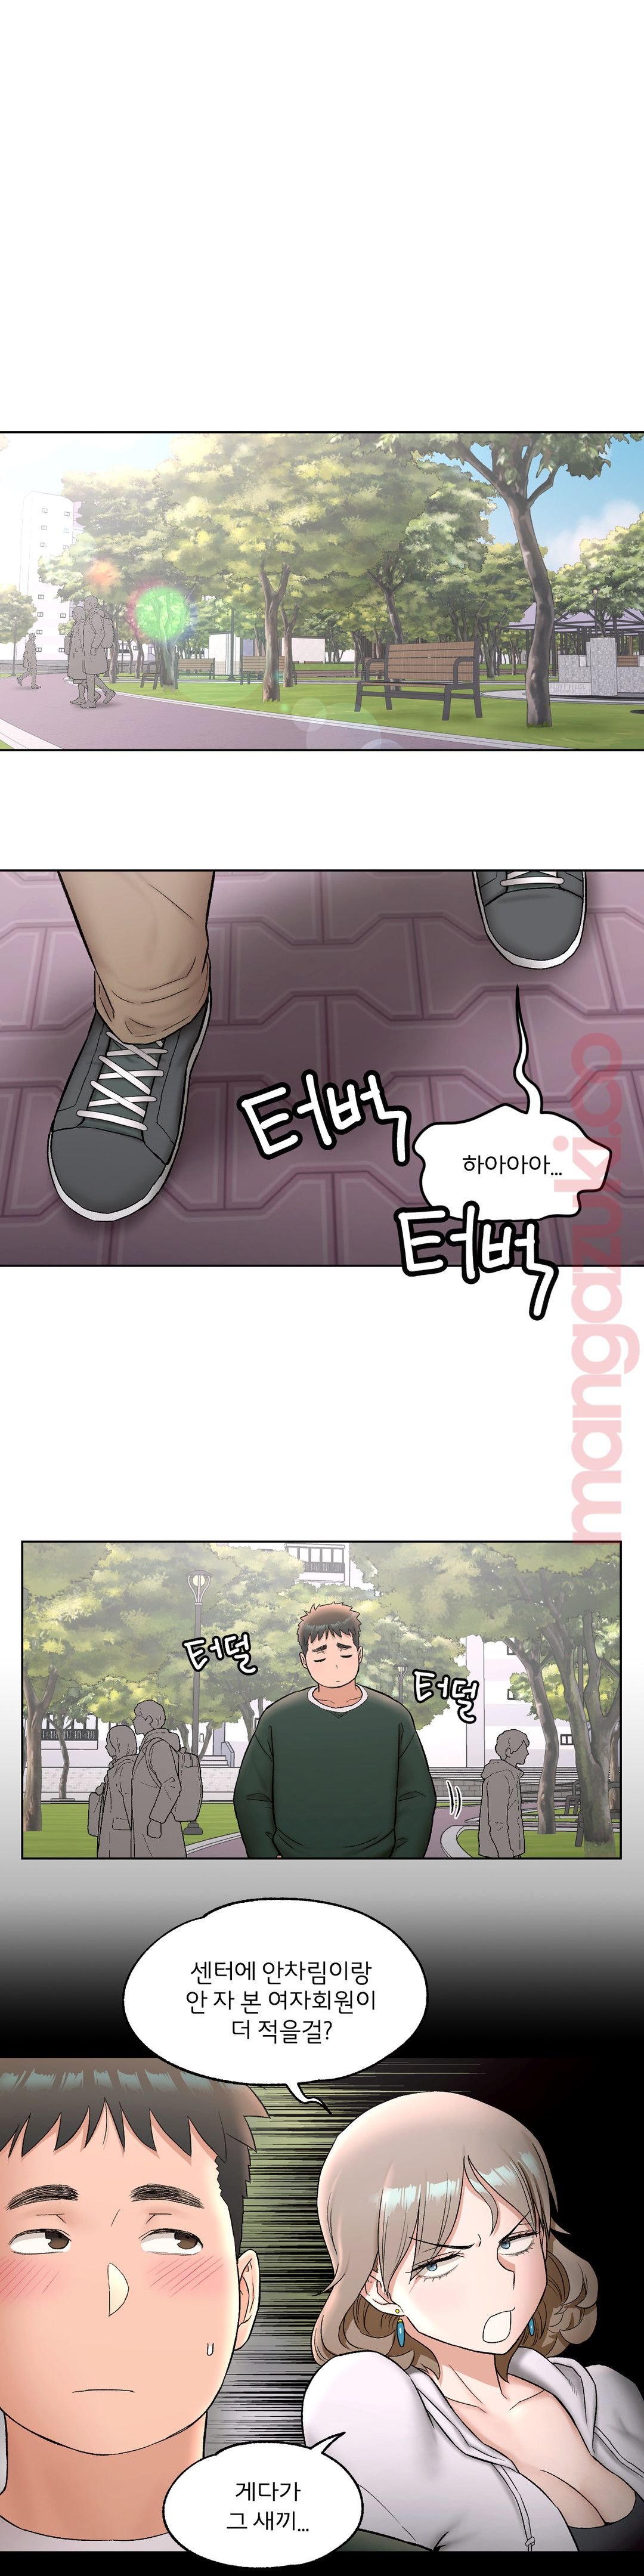 Sexercise Raw - Chapter 52 Page 6